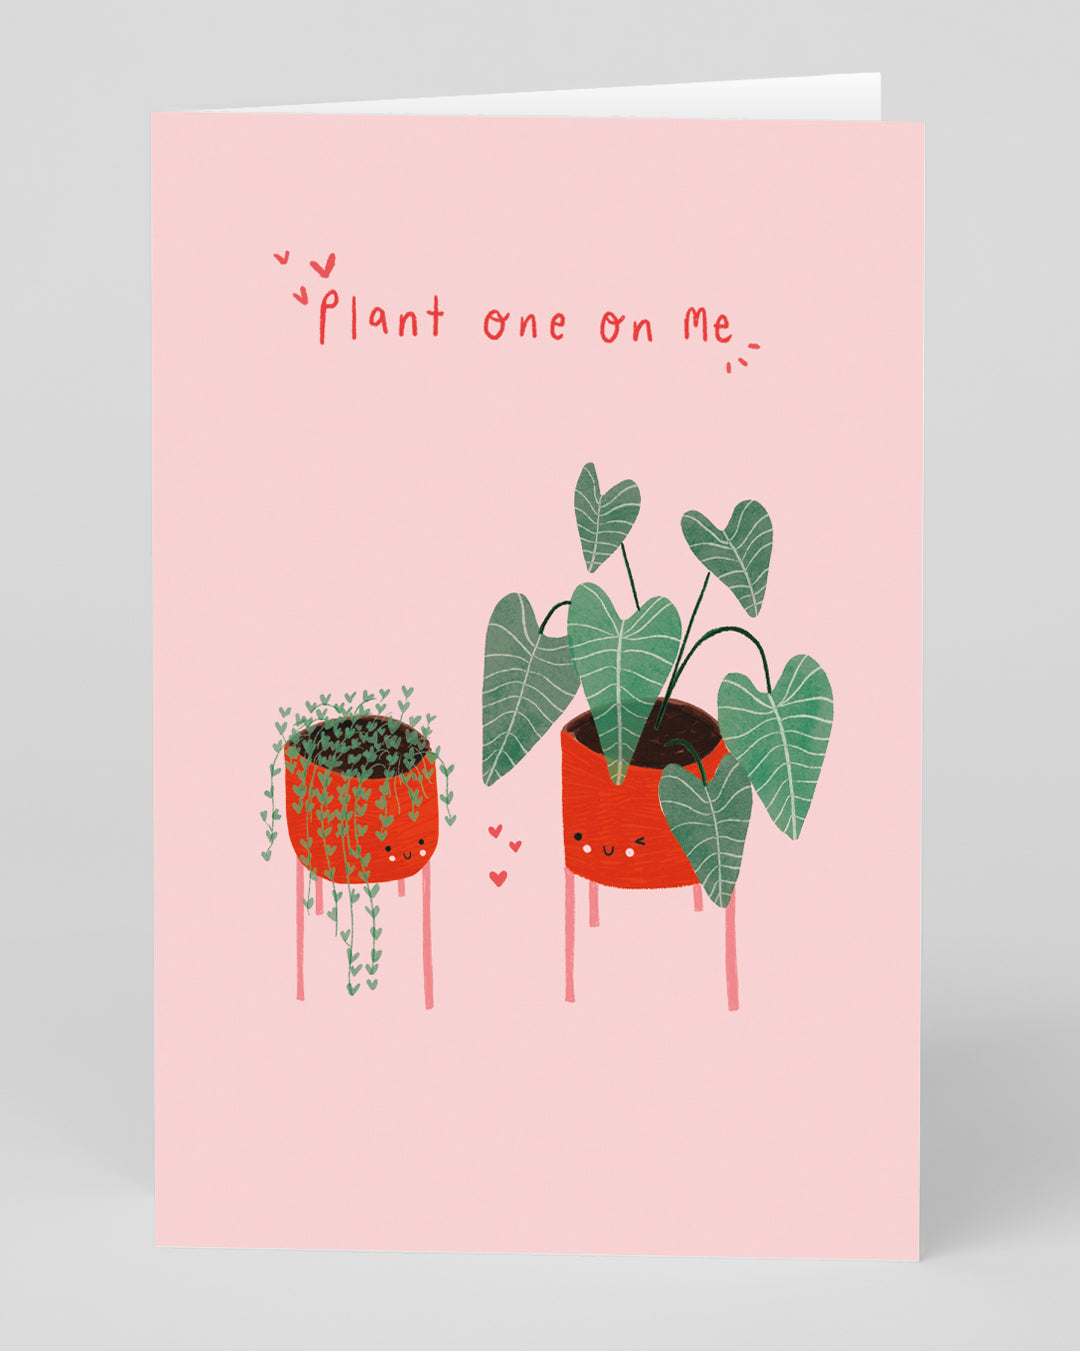 Valentine’s Day | Valentines Card For Him or Her | Personalised Plant One On Me Card | Ohh Deer Unique Valentine’s Card | Artwork by Ohh Deer | Made In The UK, Eco-Friendly Materials, Plastic Free Packaging